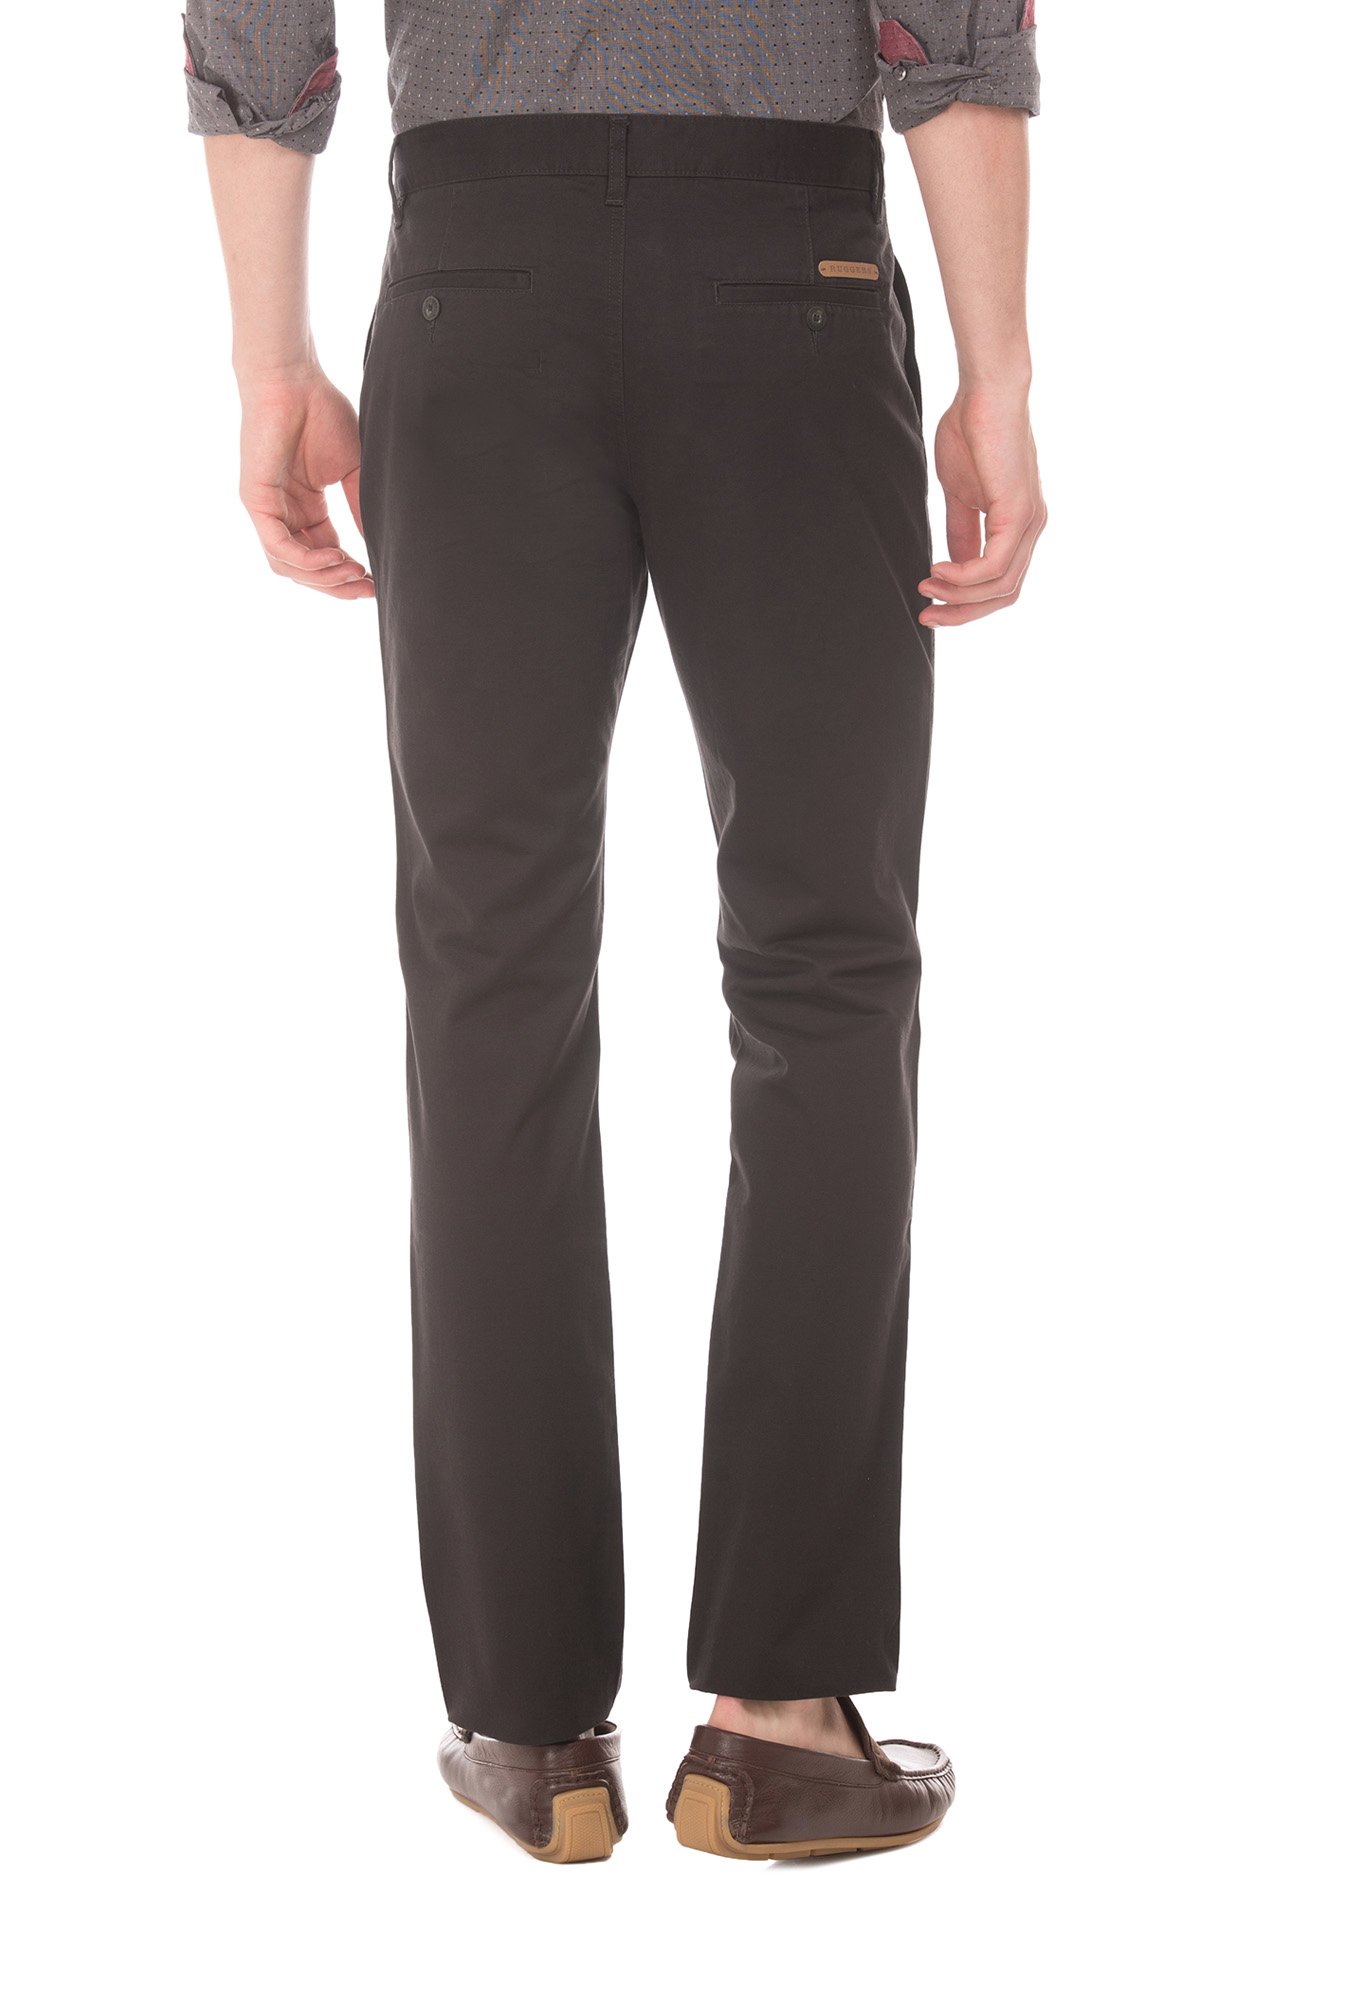 Buy Off-White Trousers & Pants for Men by Ruggers Online | Ajio.com